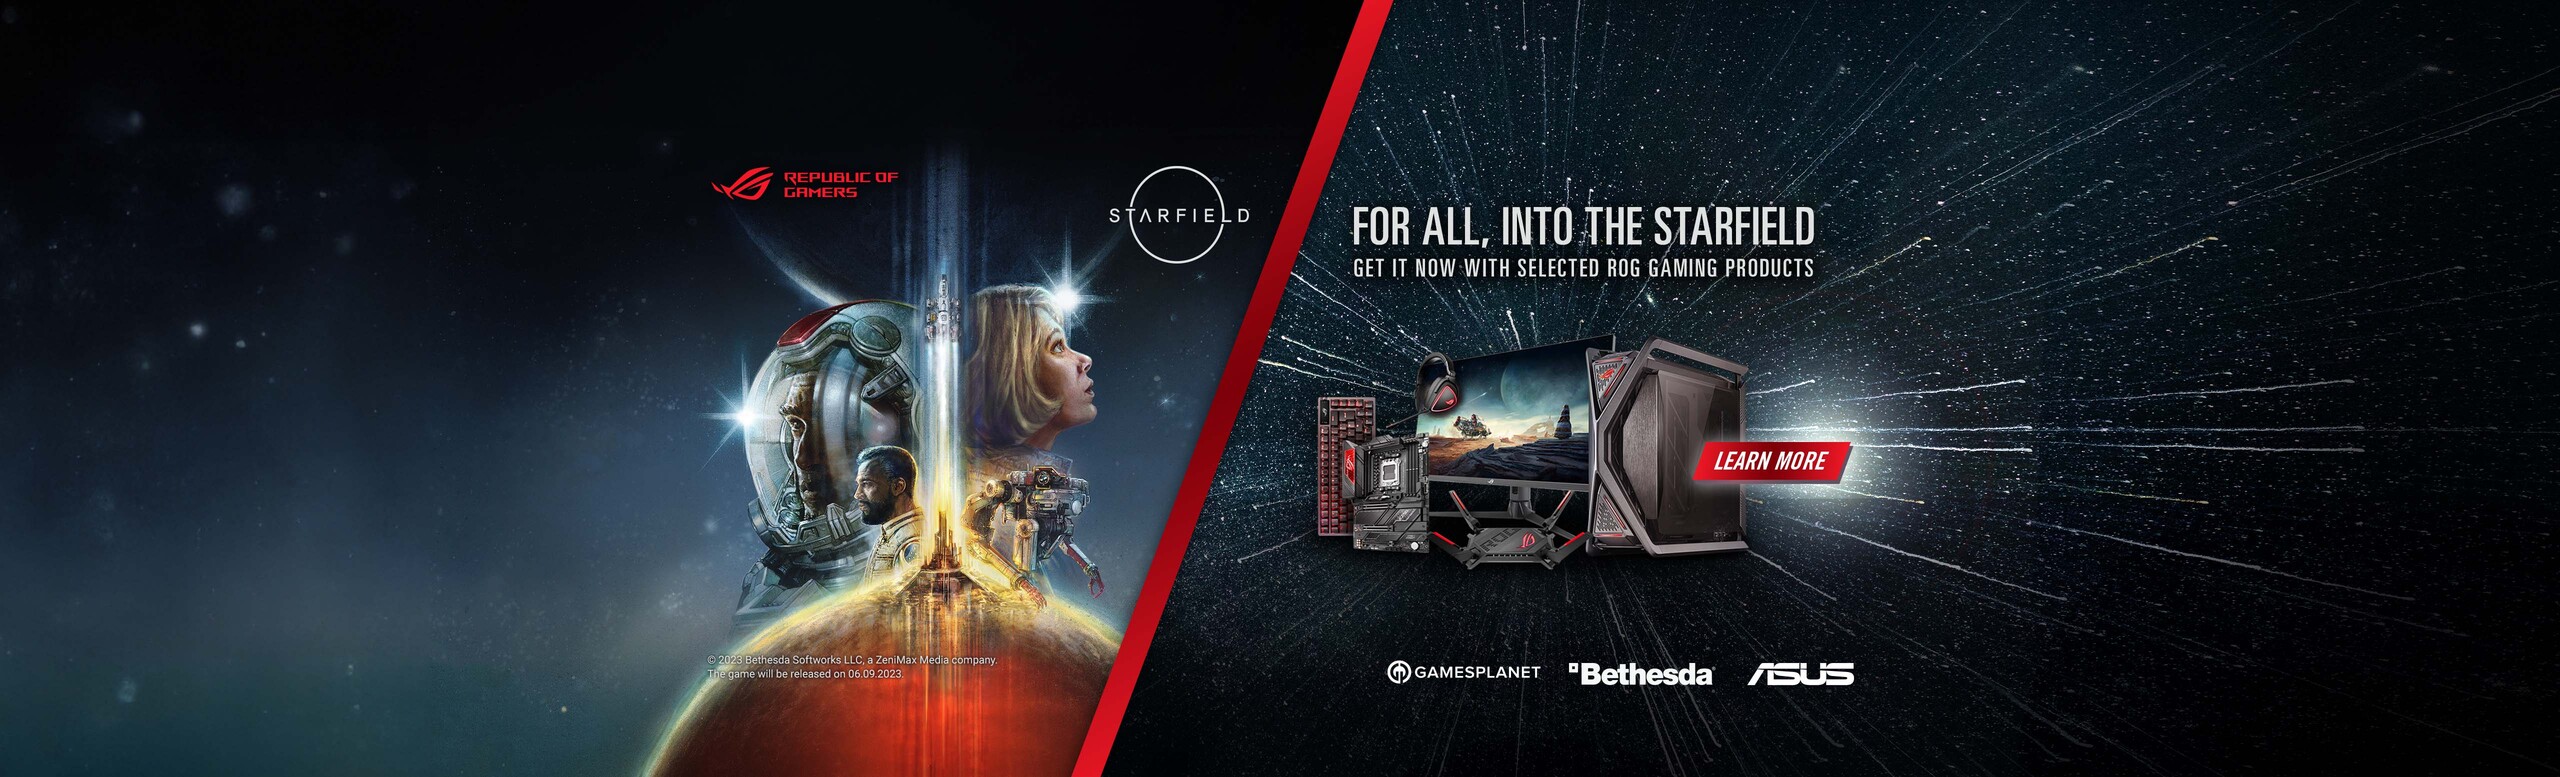 Purchase participating ROG products and get STARFIELD!